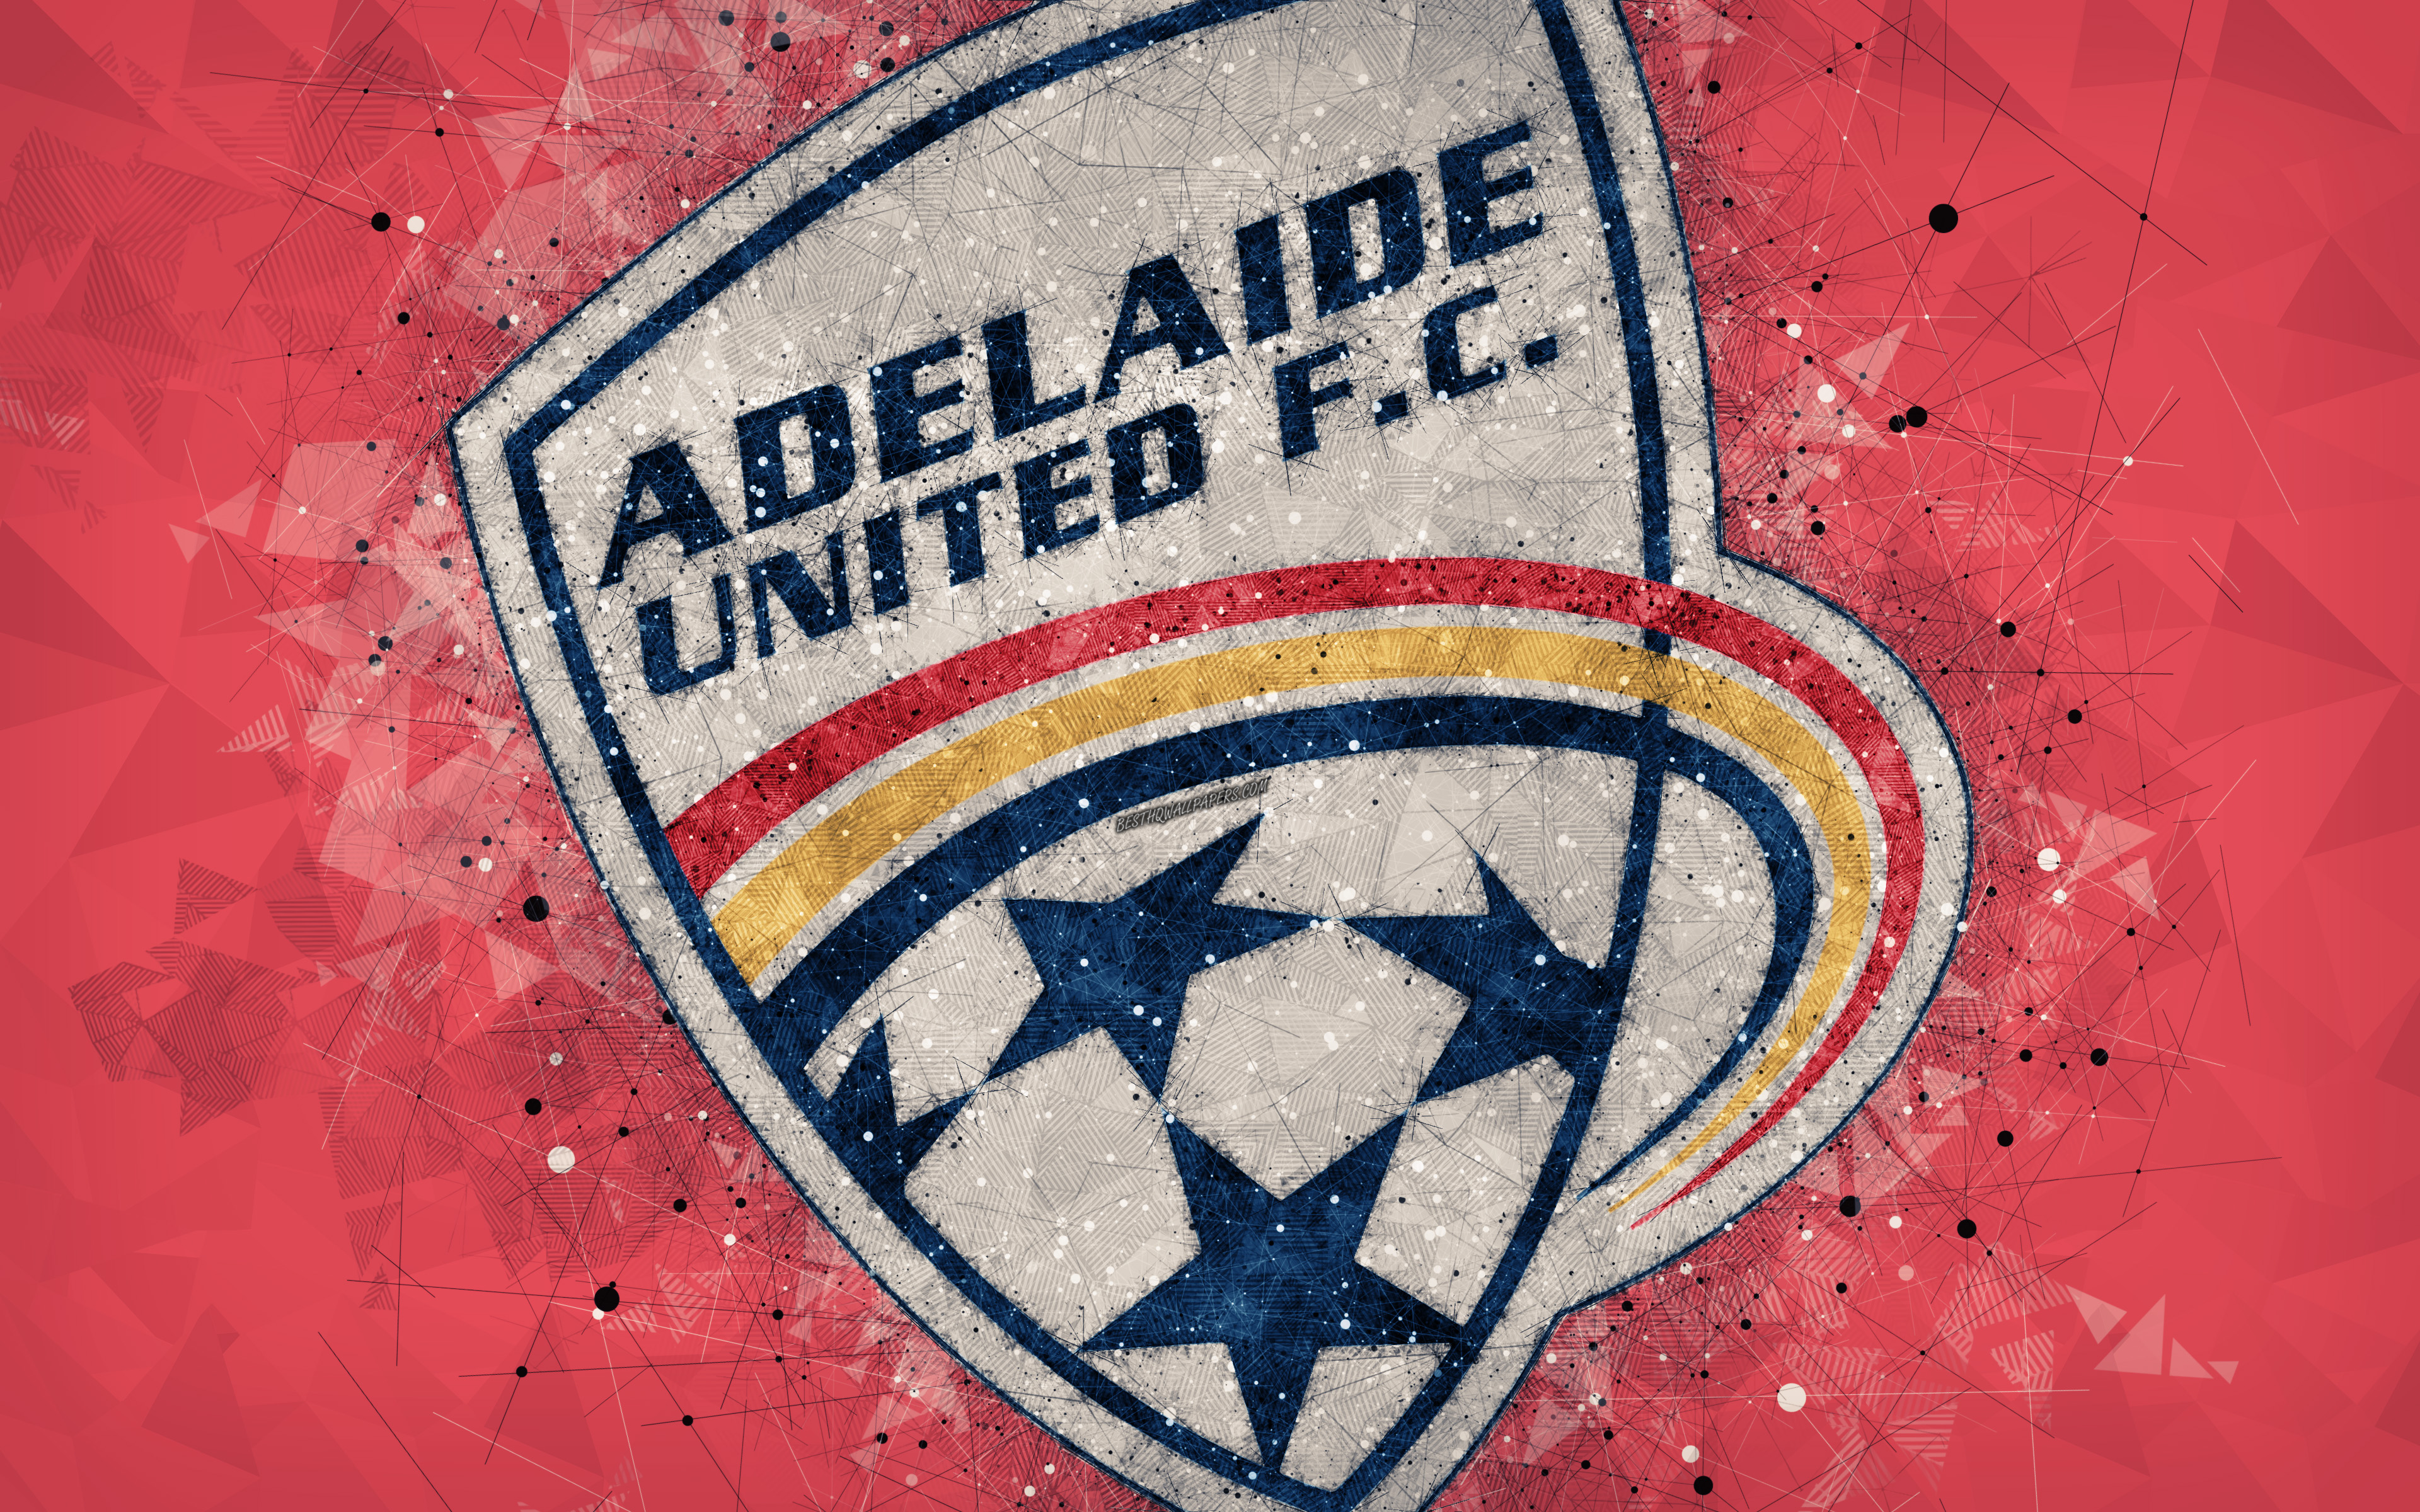 Sports Adelaide United FC HD Wallpaper | Background Image